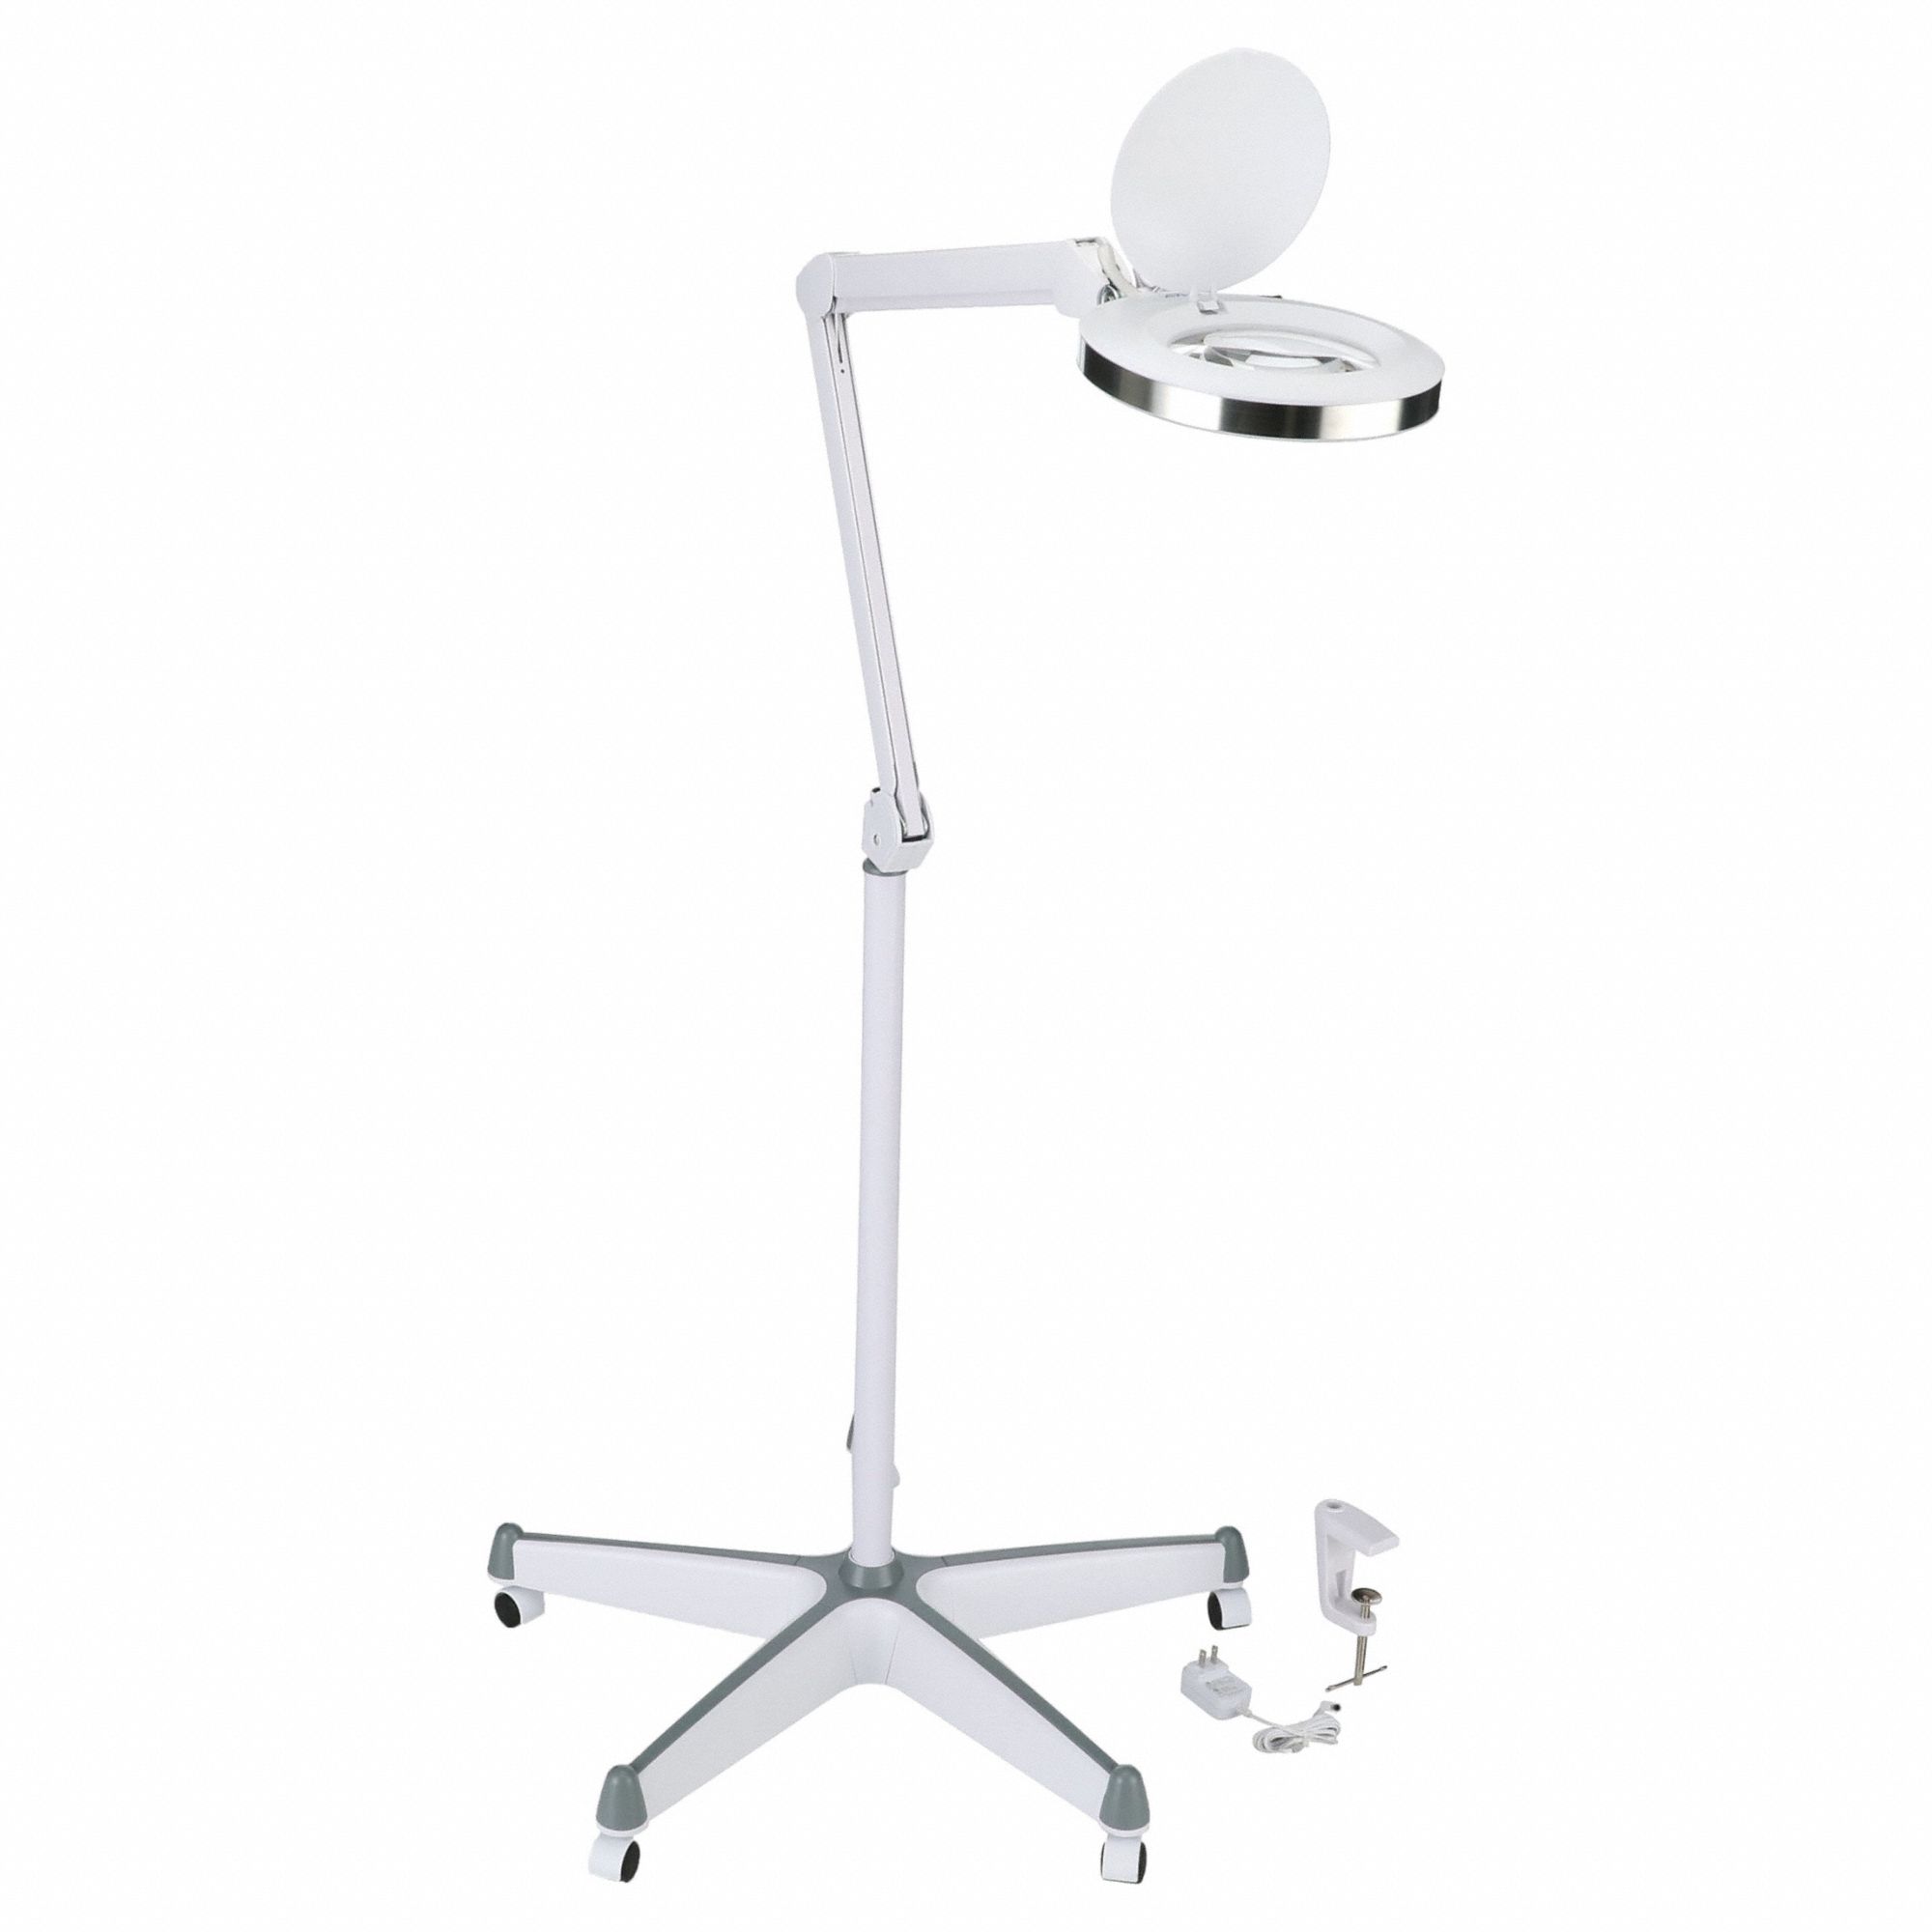 AVEN Round Magnifier Light: LED, 2.25x, 5 Diopter, 560 lm Max Brightness,  36 in Arm Reach, 6500K